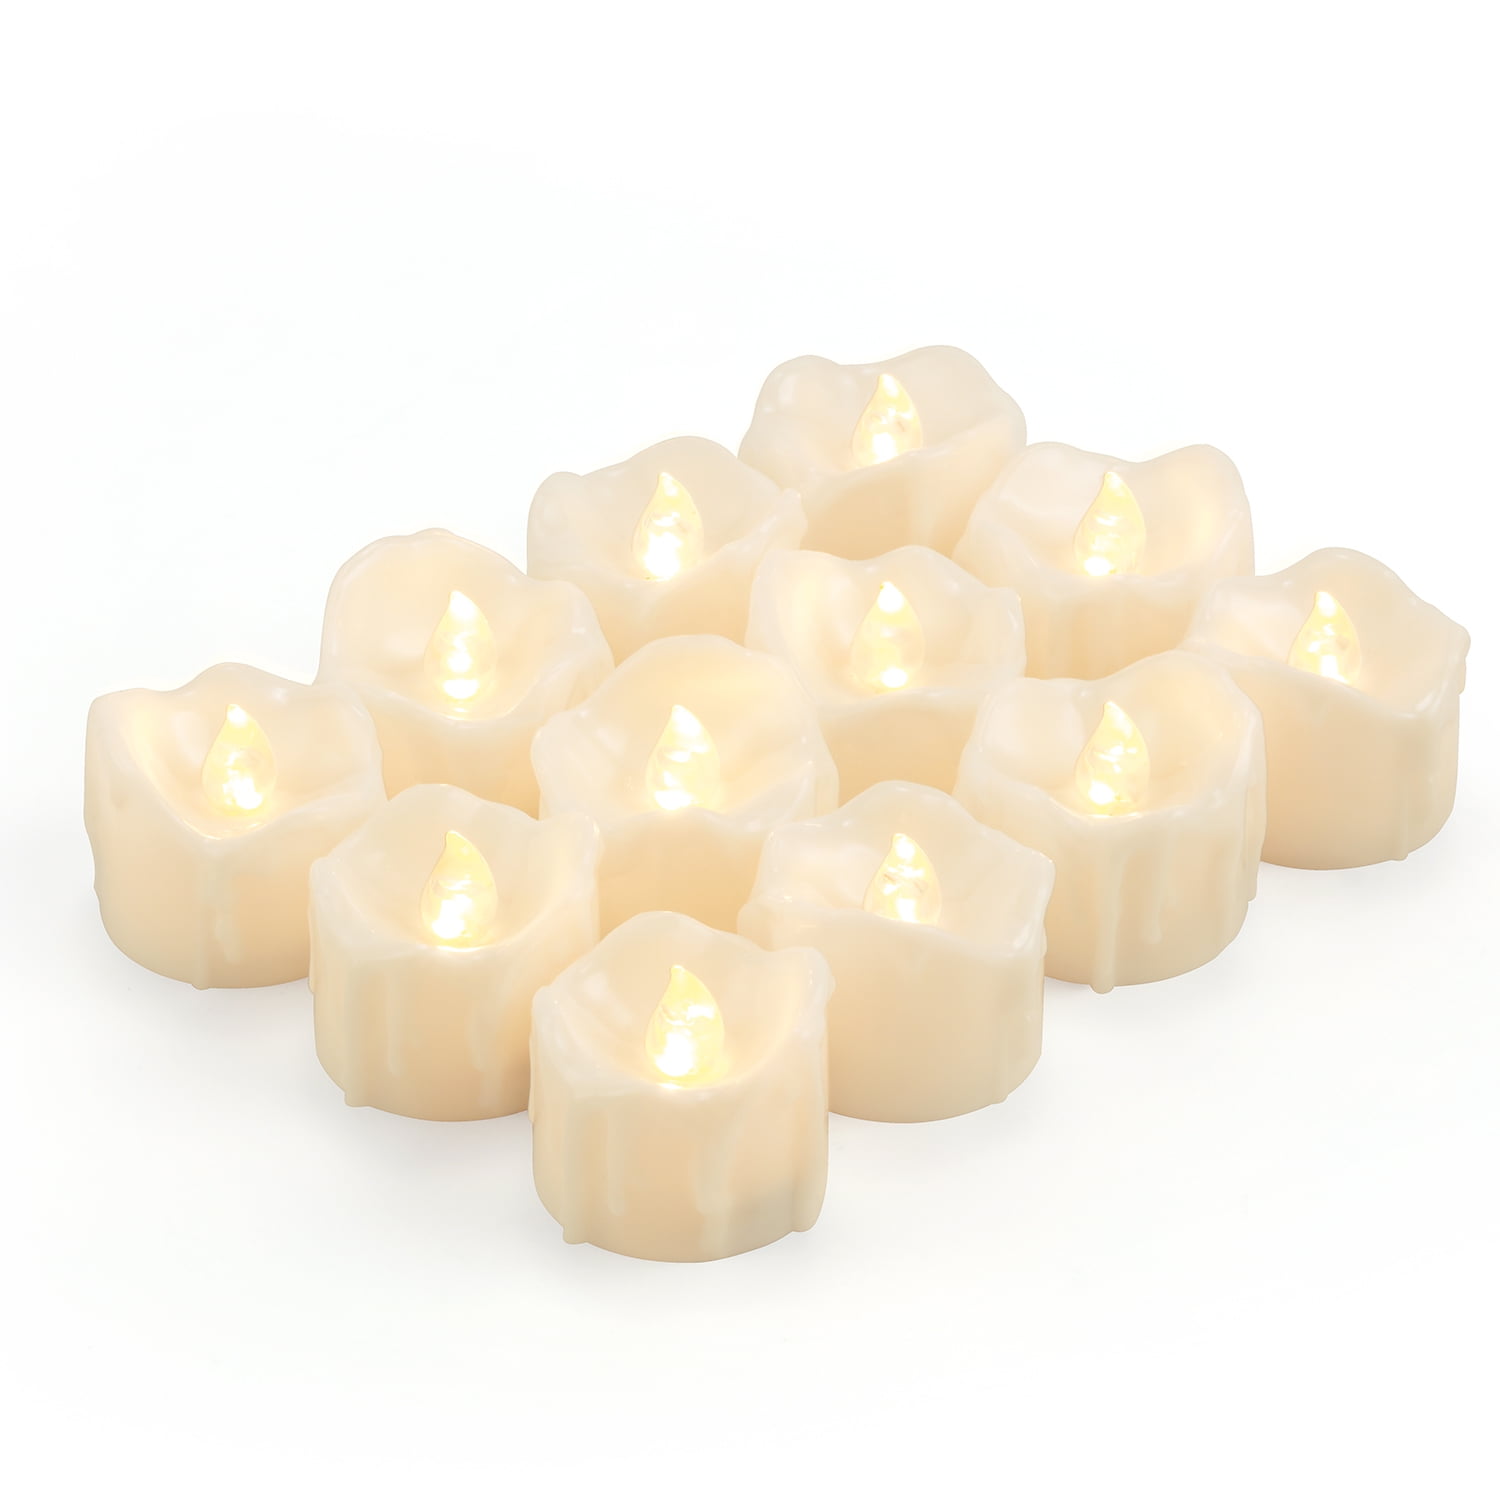 Pack of 24 LED Tea Lights Battery Operated Warm White Flameless Candles 